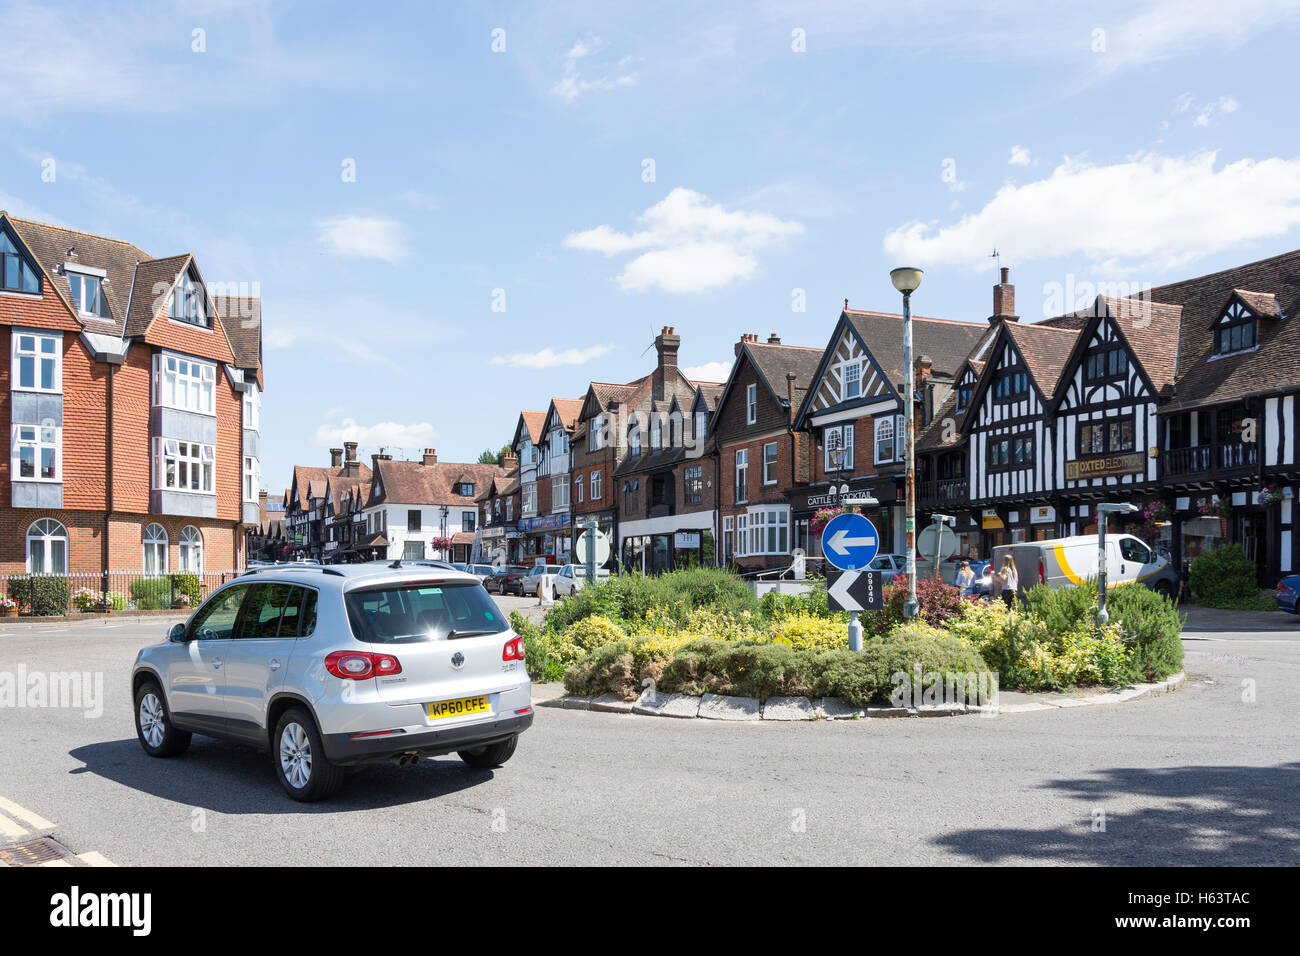 Station Road West, Oxted, Surrey, England, Regno Unito Foto Stock